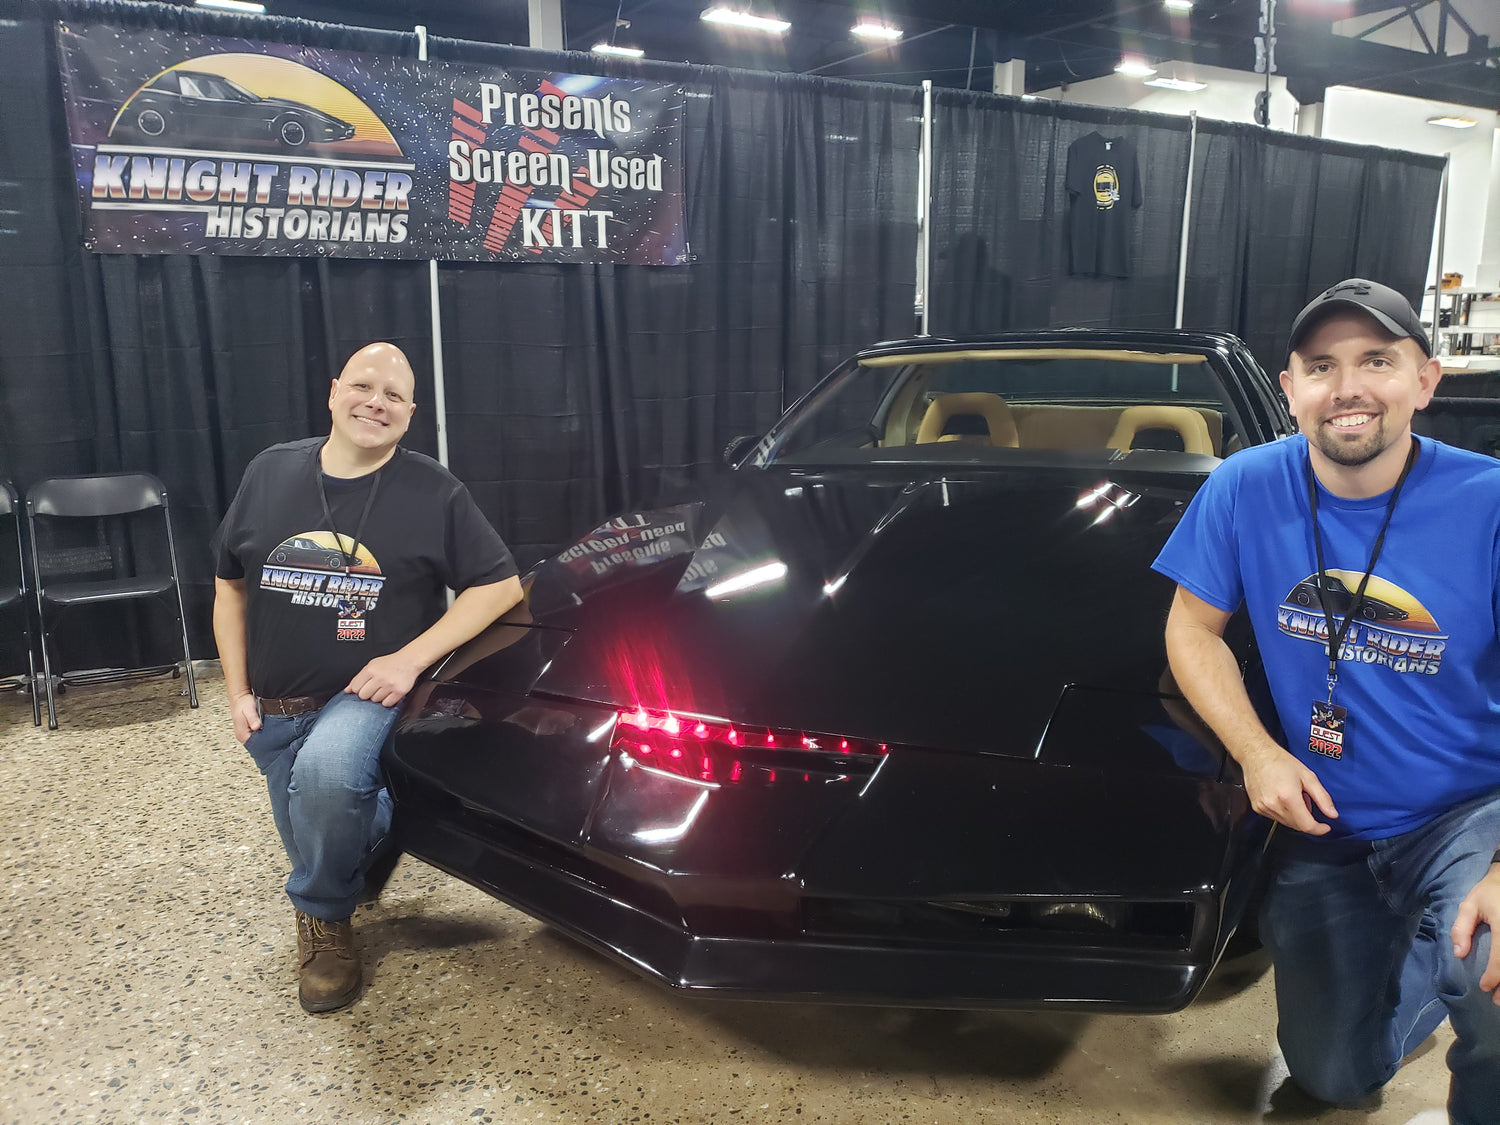 Knight Rider Historians Are The Epic Superfans Keeping KITT Alive